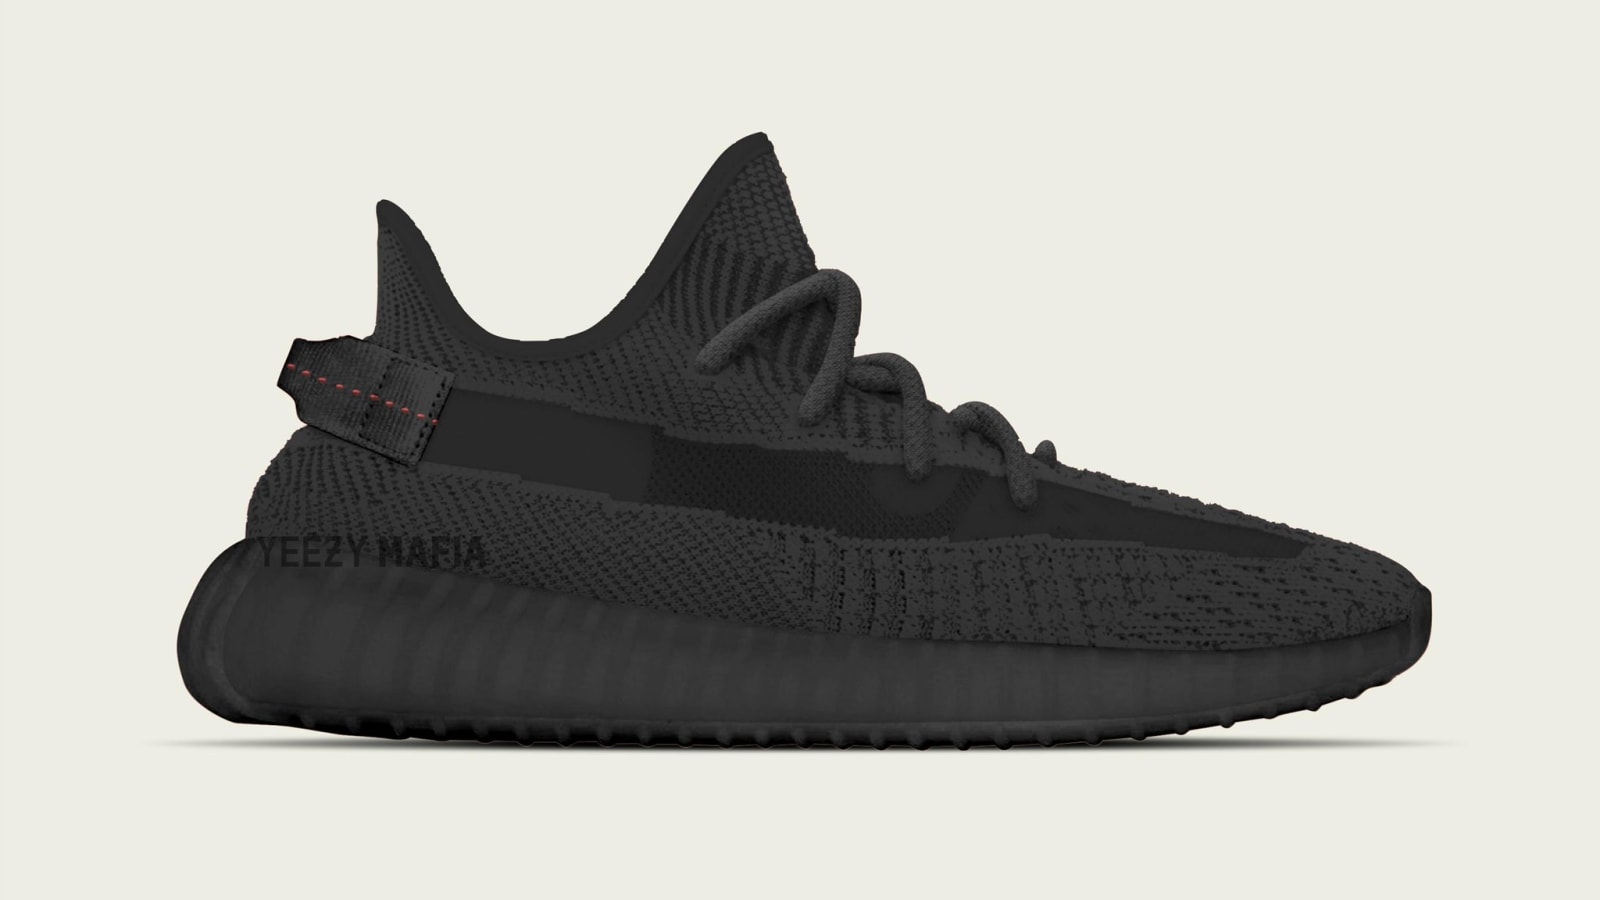 Yeezy Boost 350 V2 Price In Philippines - HD Wallpaper 